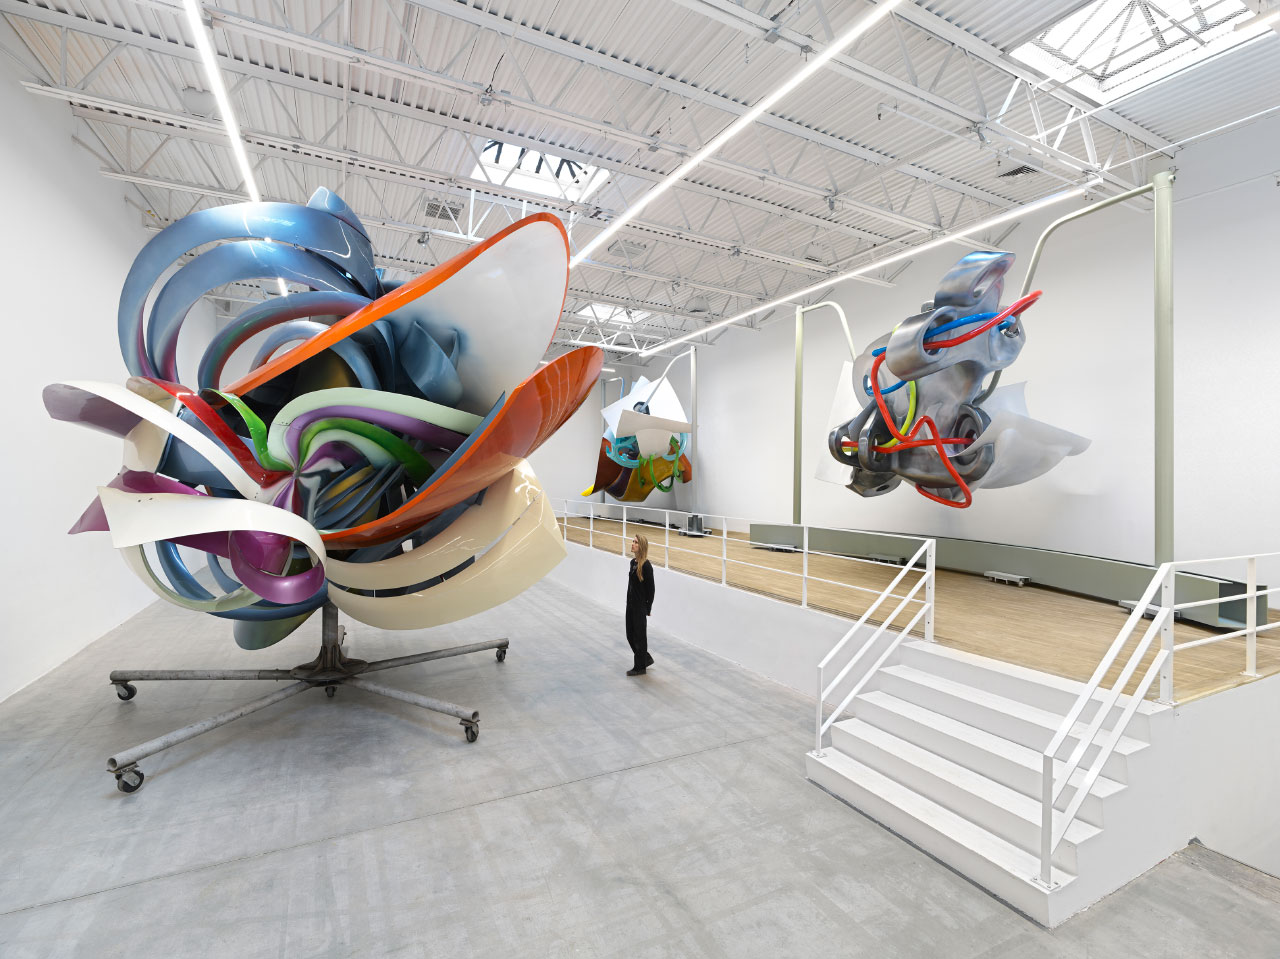 Frank Stella’s Psychedelic Sculptures Land in New York